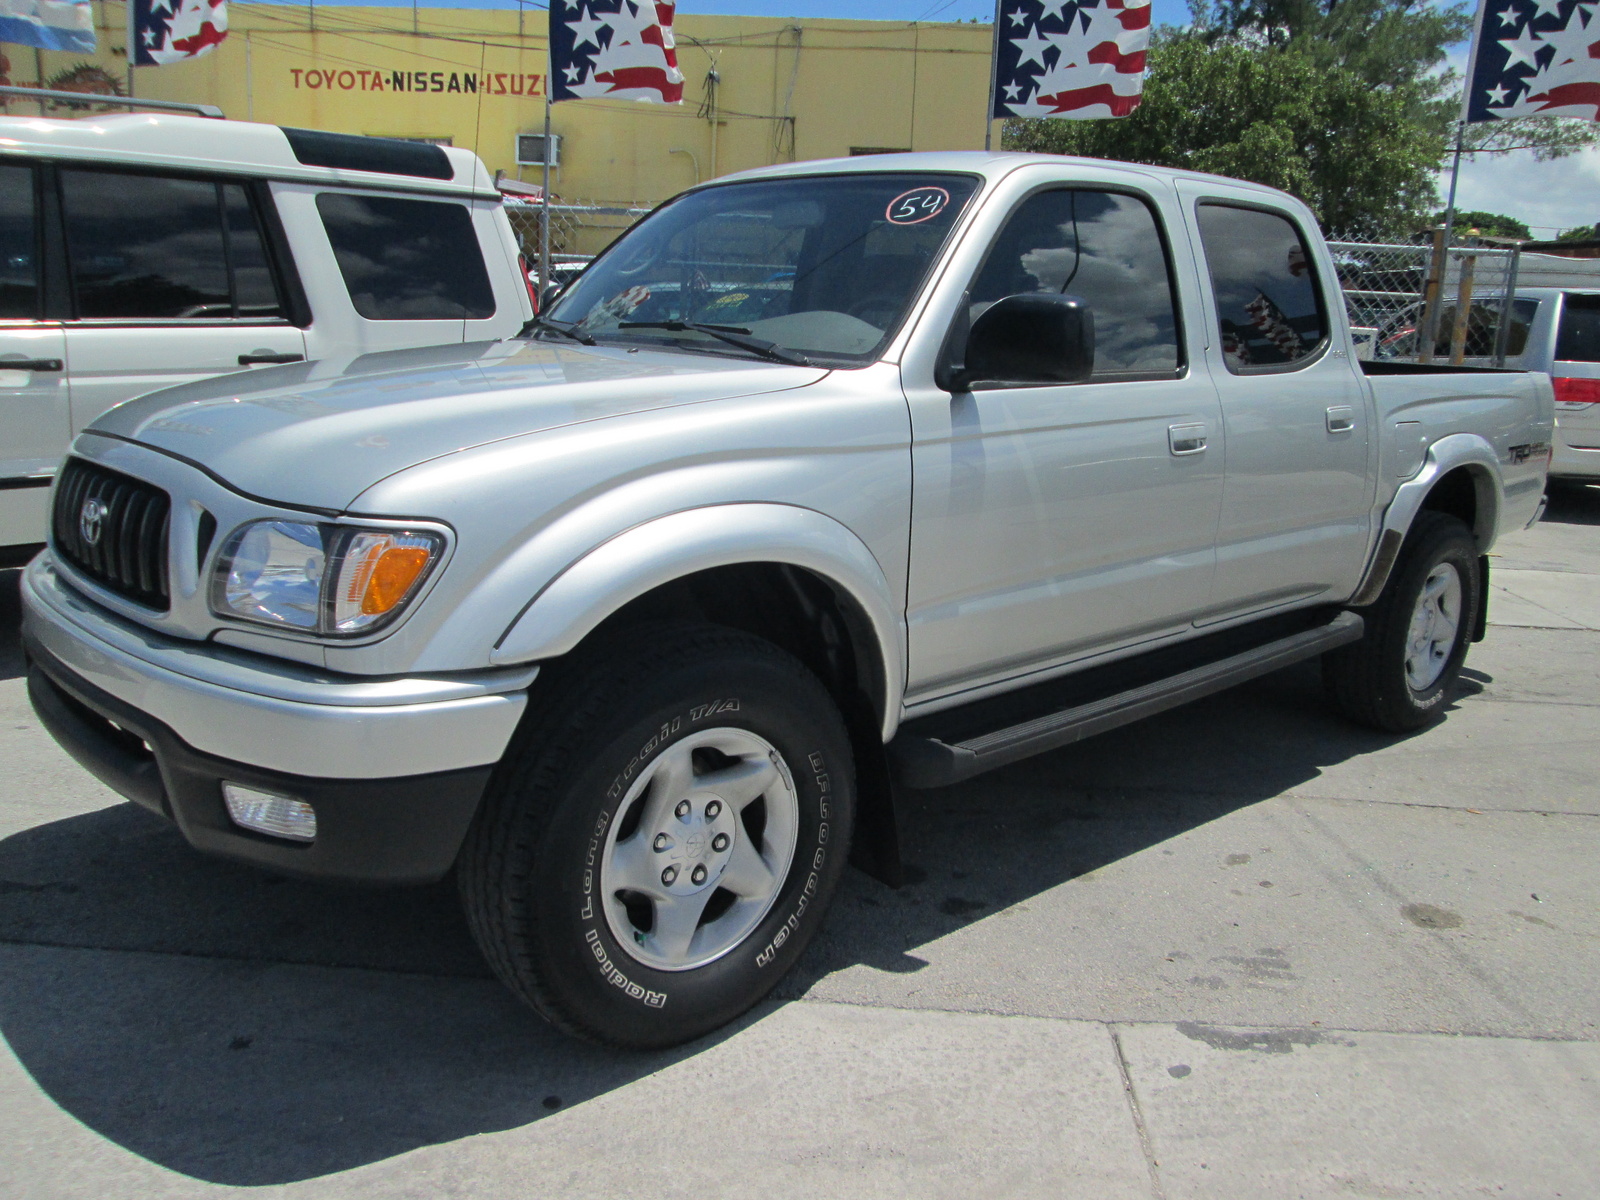 2003 Toyota tacoma 4wd review